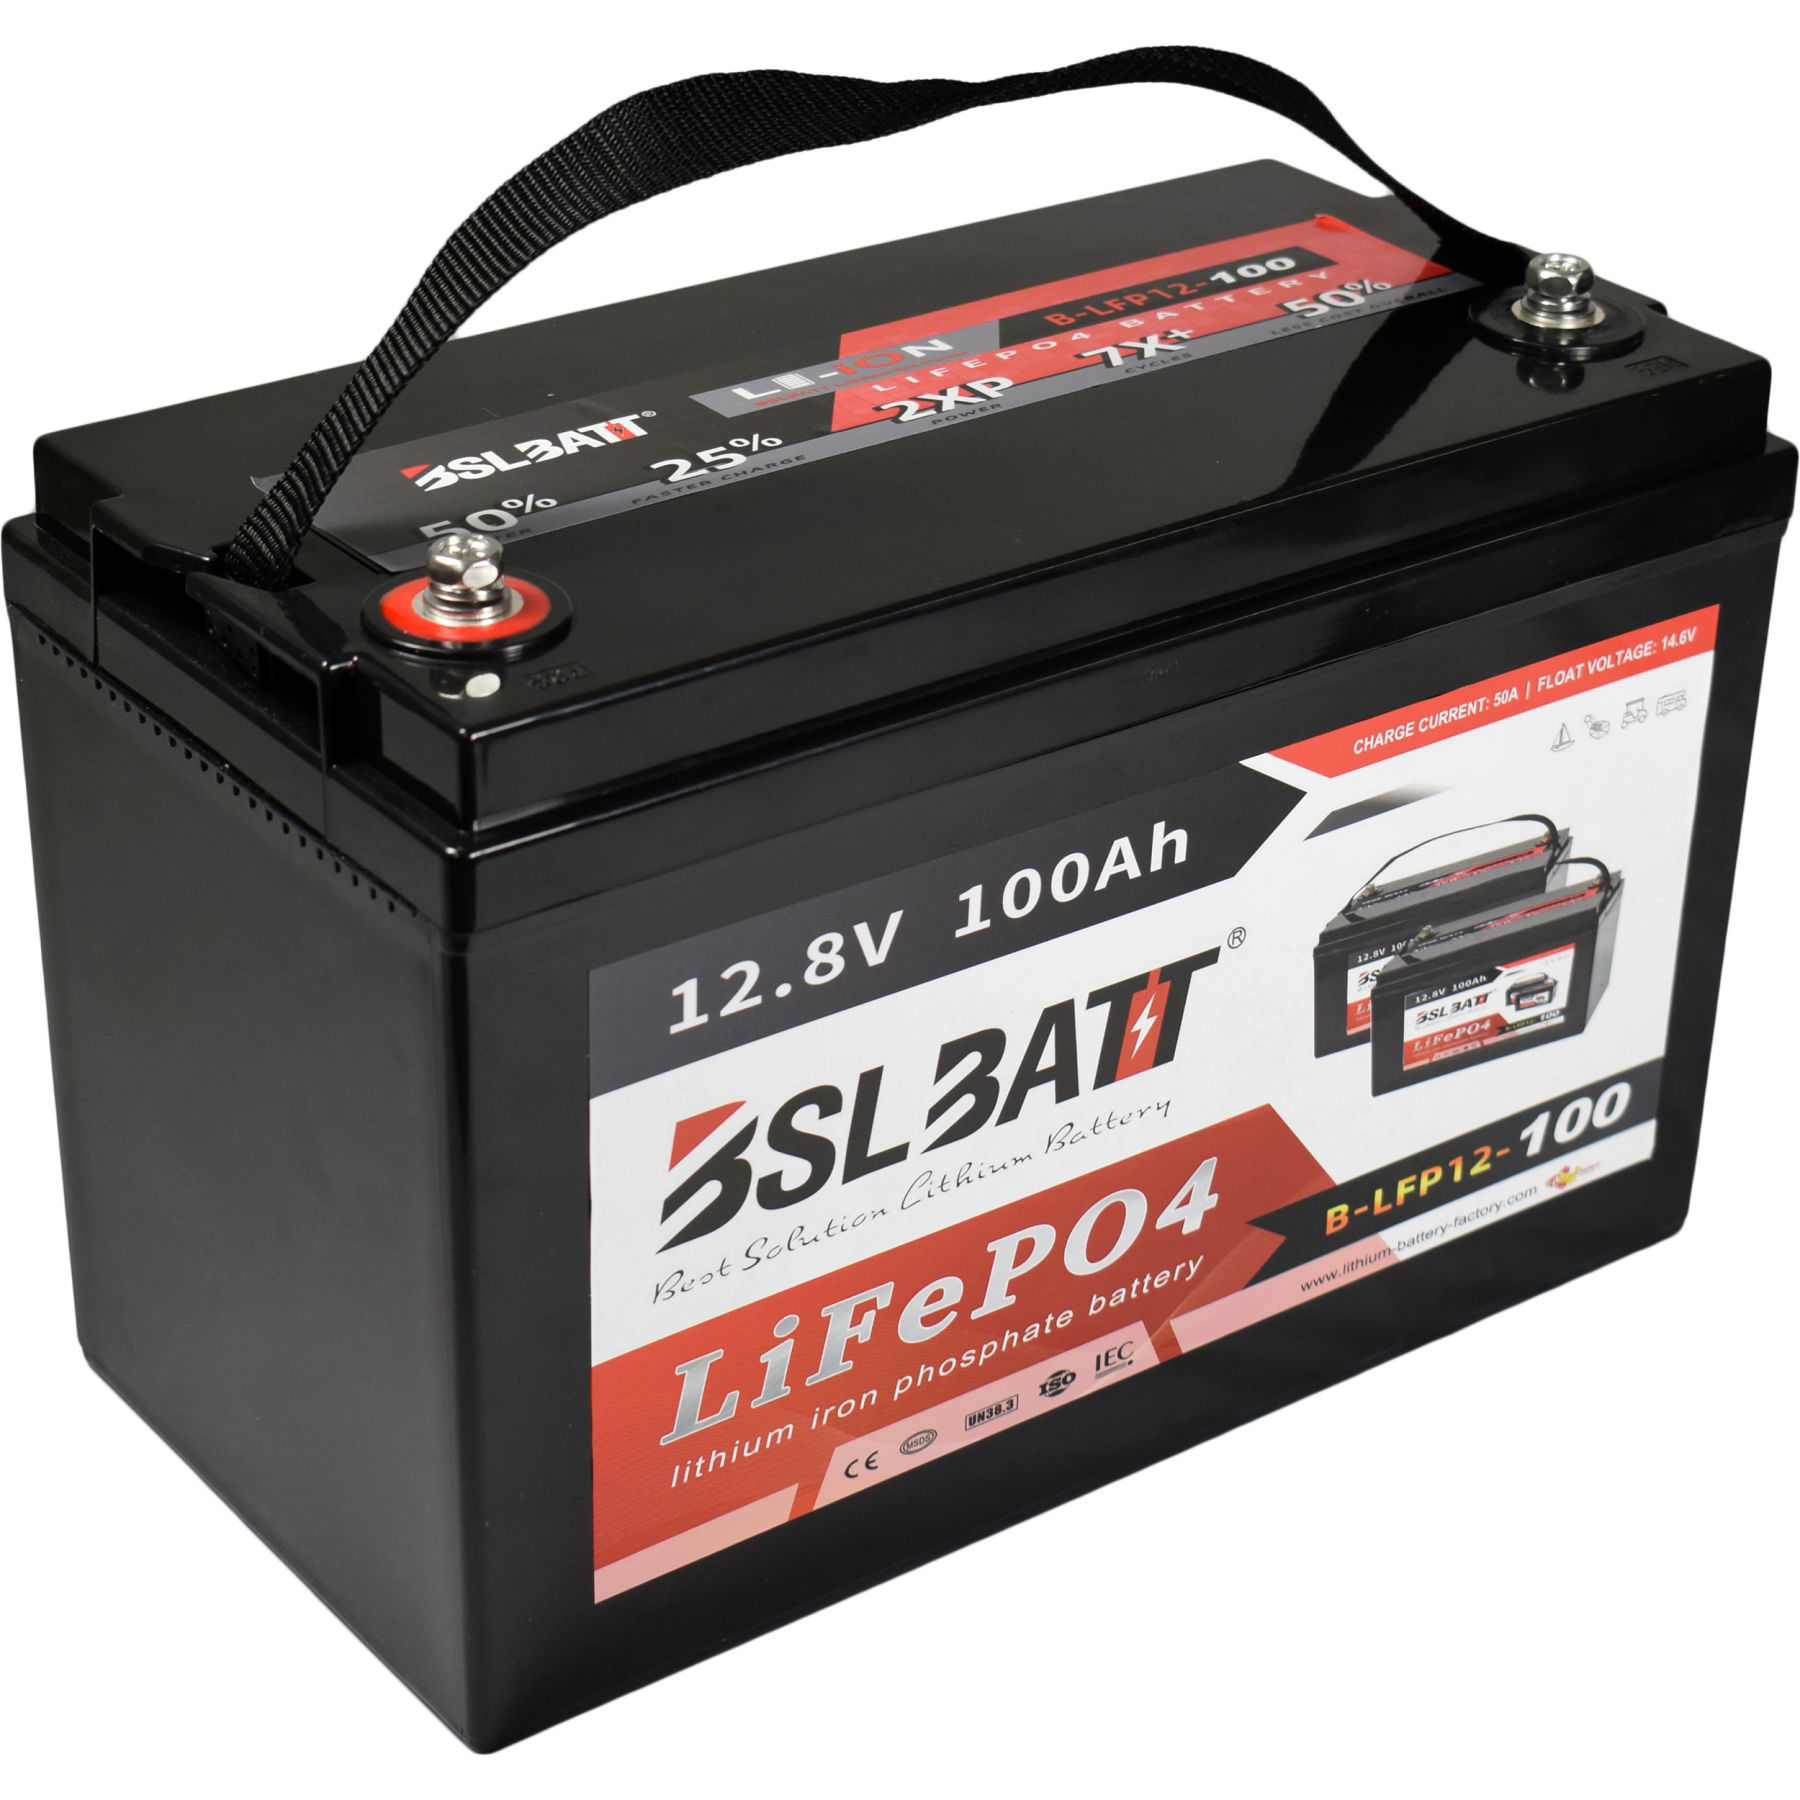 CHINS Smart 12.8V 100AH Lithium Battery, Support Low Temperature Charging  (-31°F), Built-in 100A BMS, 2000+ Cycles, Mobile Phone APP Monitors Battery